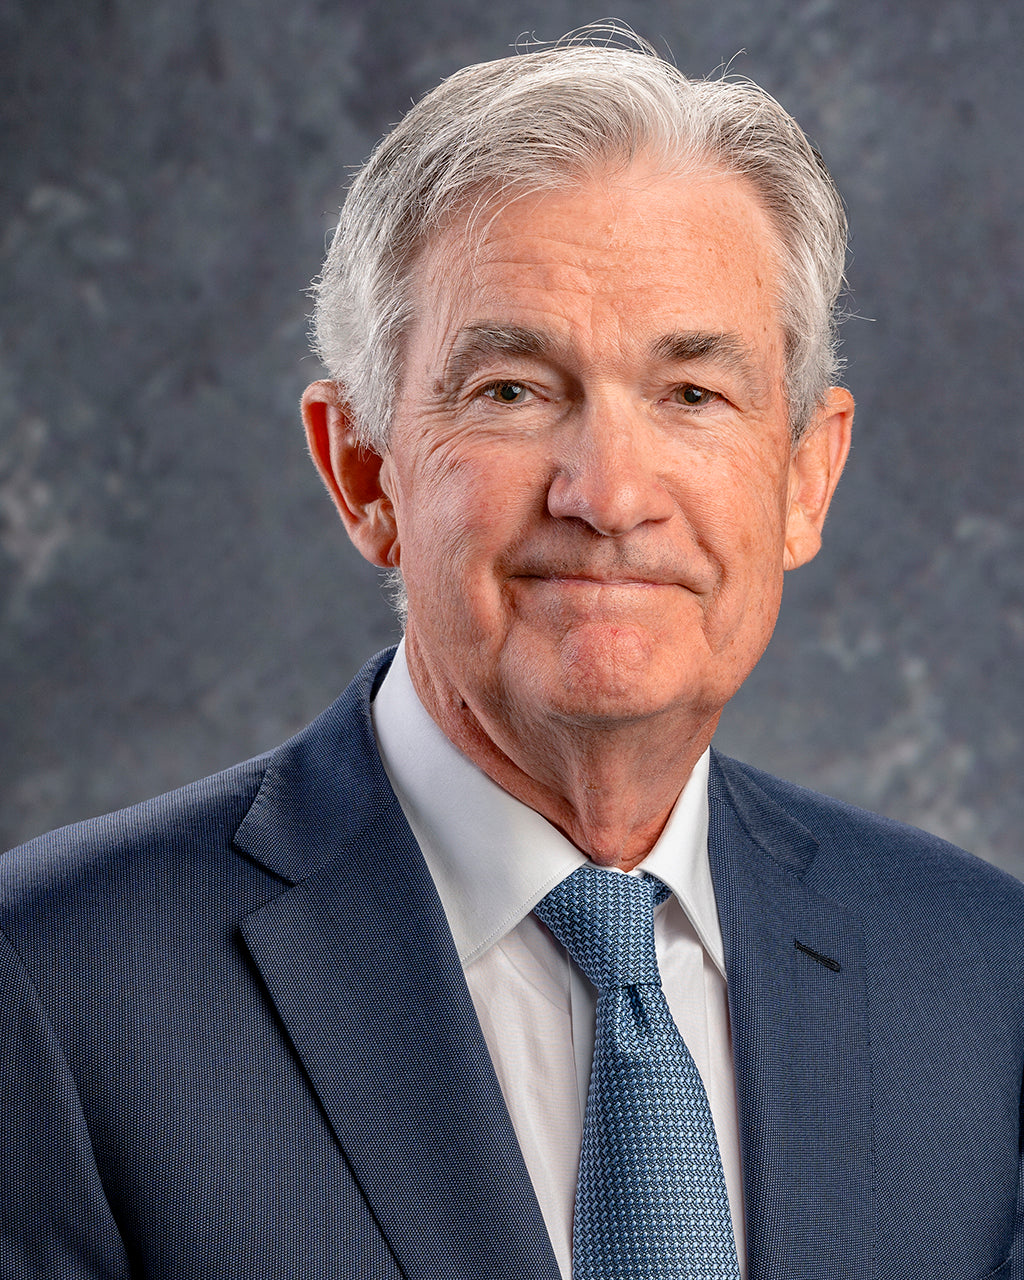 JEROME POWELL GLOSSY POSTER PICTURE PHOTO PRINT BANNER federal reserve jay